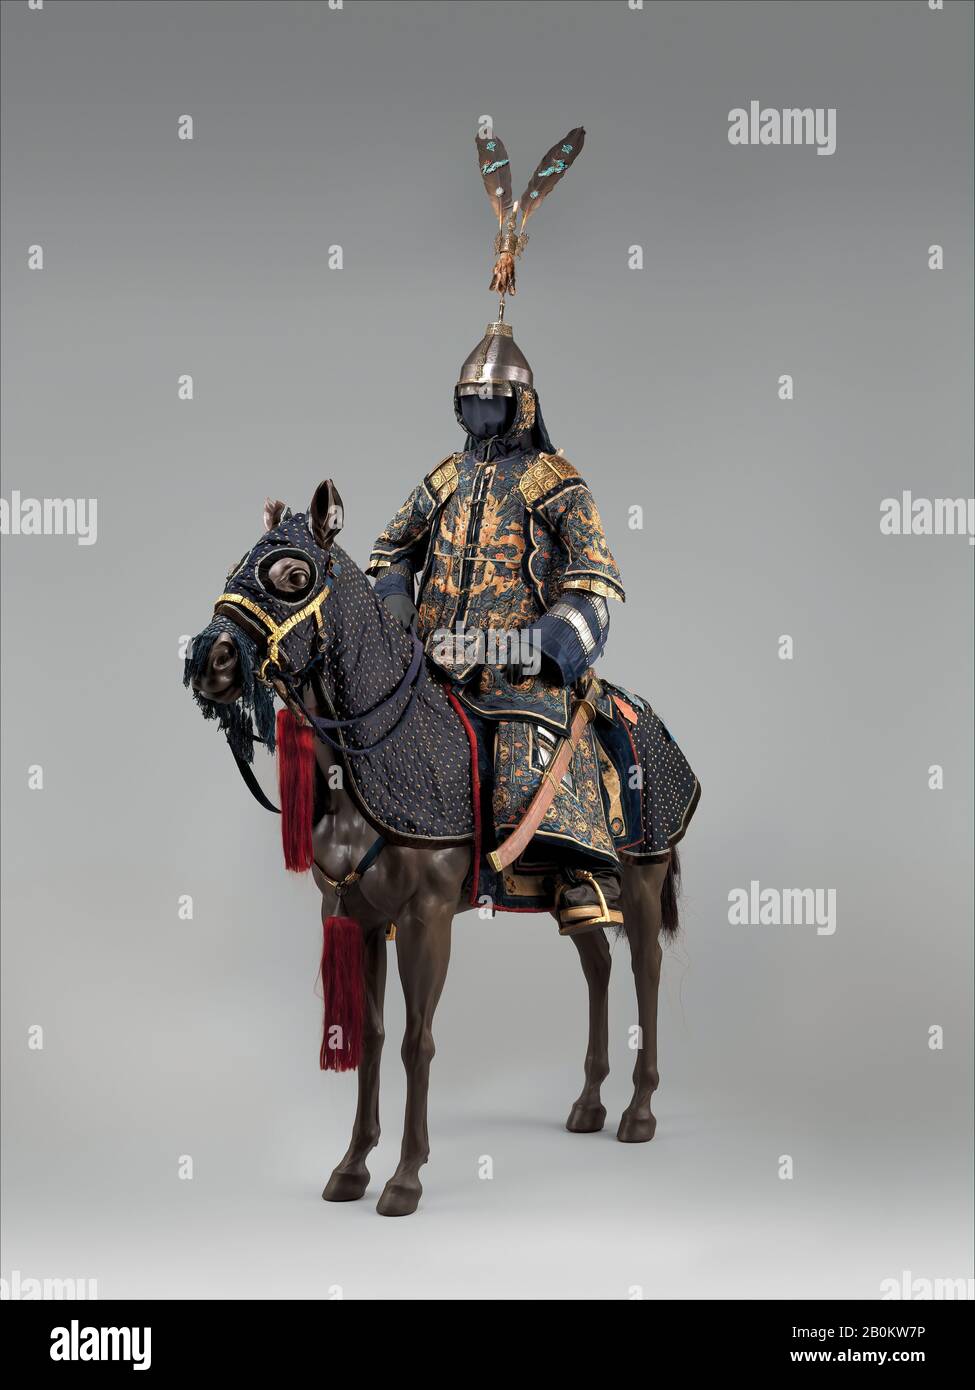 Ceremonial Armors for Man (Dingjia) and Horse, Chinese, 18th century, Chinese, Steel, gold, silver, velvet, satin, iron, coral, malachite, turquoise, crystal, silk, cotton, brass, pearls, marten, feathers (kingfisher), paper, lacquer, Helmet (a); H. including nape defense 19 in. (48.3 cm); H. excluding nape defense 11 1/2 in. (29.2 cm); W. 8 3/16 in. (20.8 cm); D. 9 3/4 in. (24.8 cm); Wt. 3 lbs. 11.8 oz. (1695.3 g); helmet lining (b); Wt. 2.8 oz. (79.4 g), Armor for Horse and Man Stock Photo